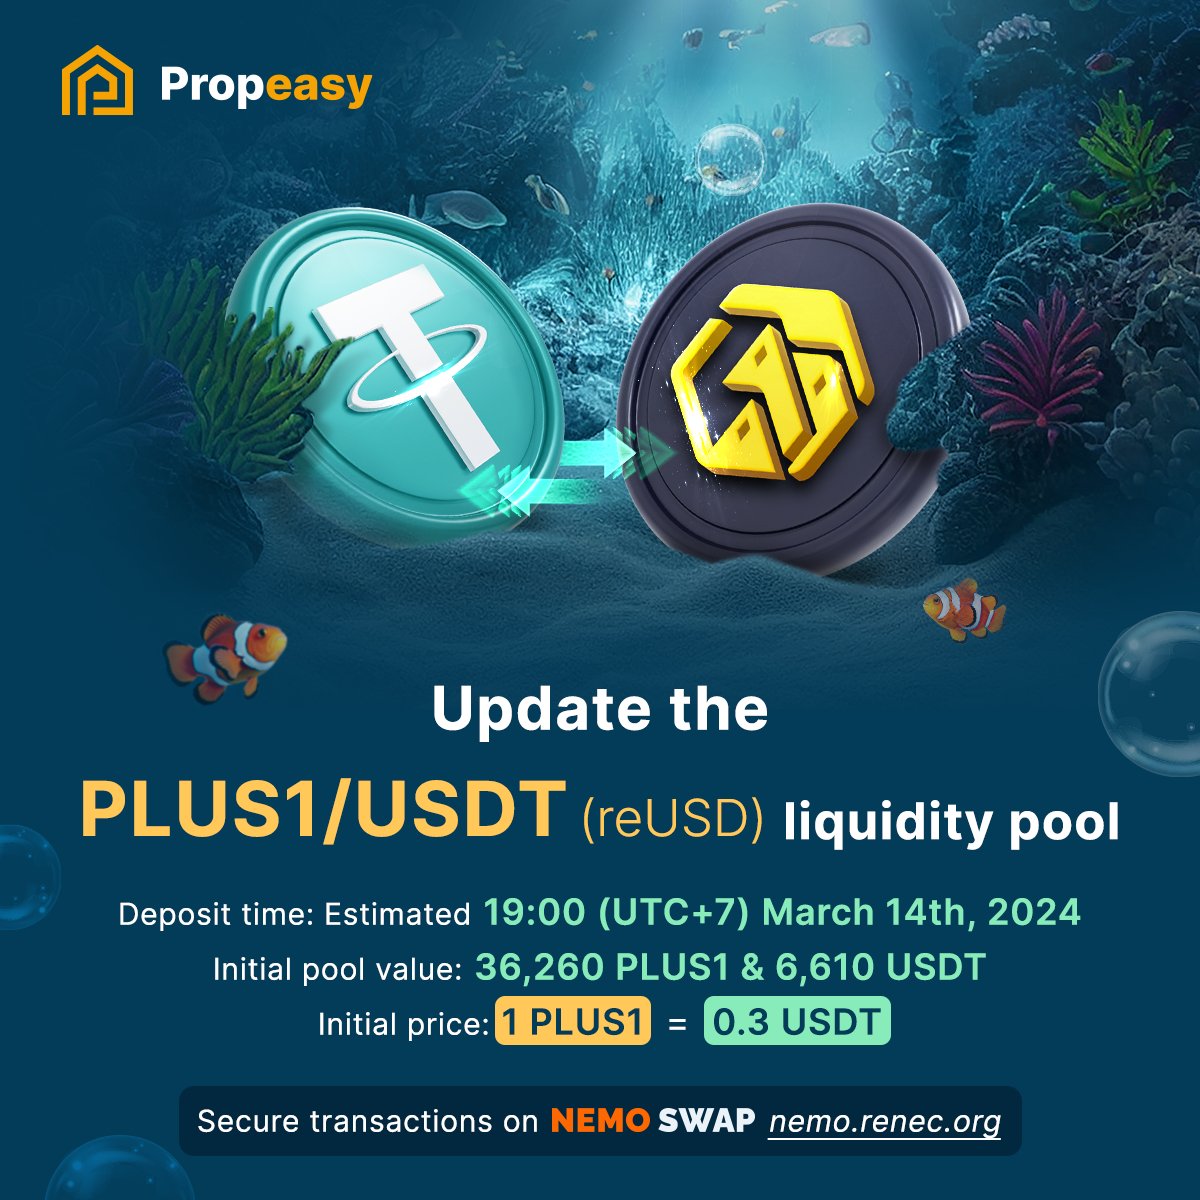 📢 Scheduled for 19:00 on March 14, 2024 (UTC+7), Propeasy will add the PLUS1/USDT liquidity pool at nemo.renec.org 📈 With the liquidity pool, you can trade PLUS1 24/7! Make informed decisions and maximize your PLUS1 potential 💰 #Propeasy #NemoSwap #PLUS1Liquidity